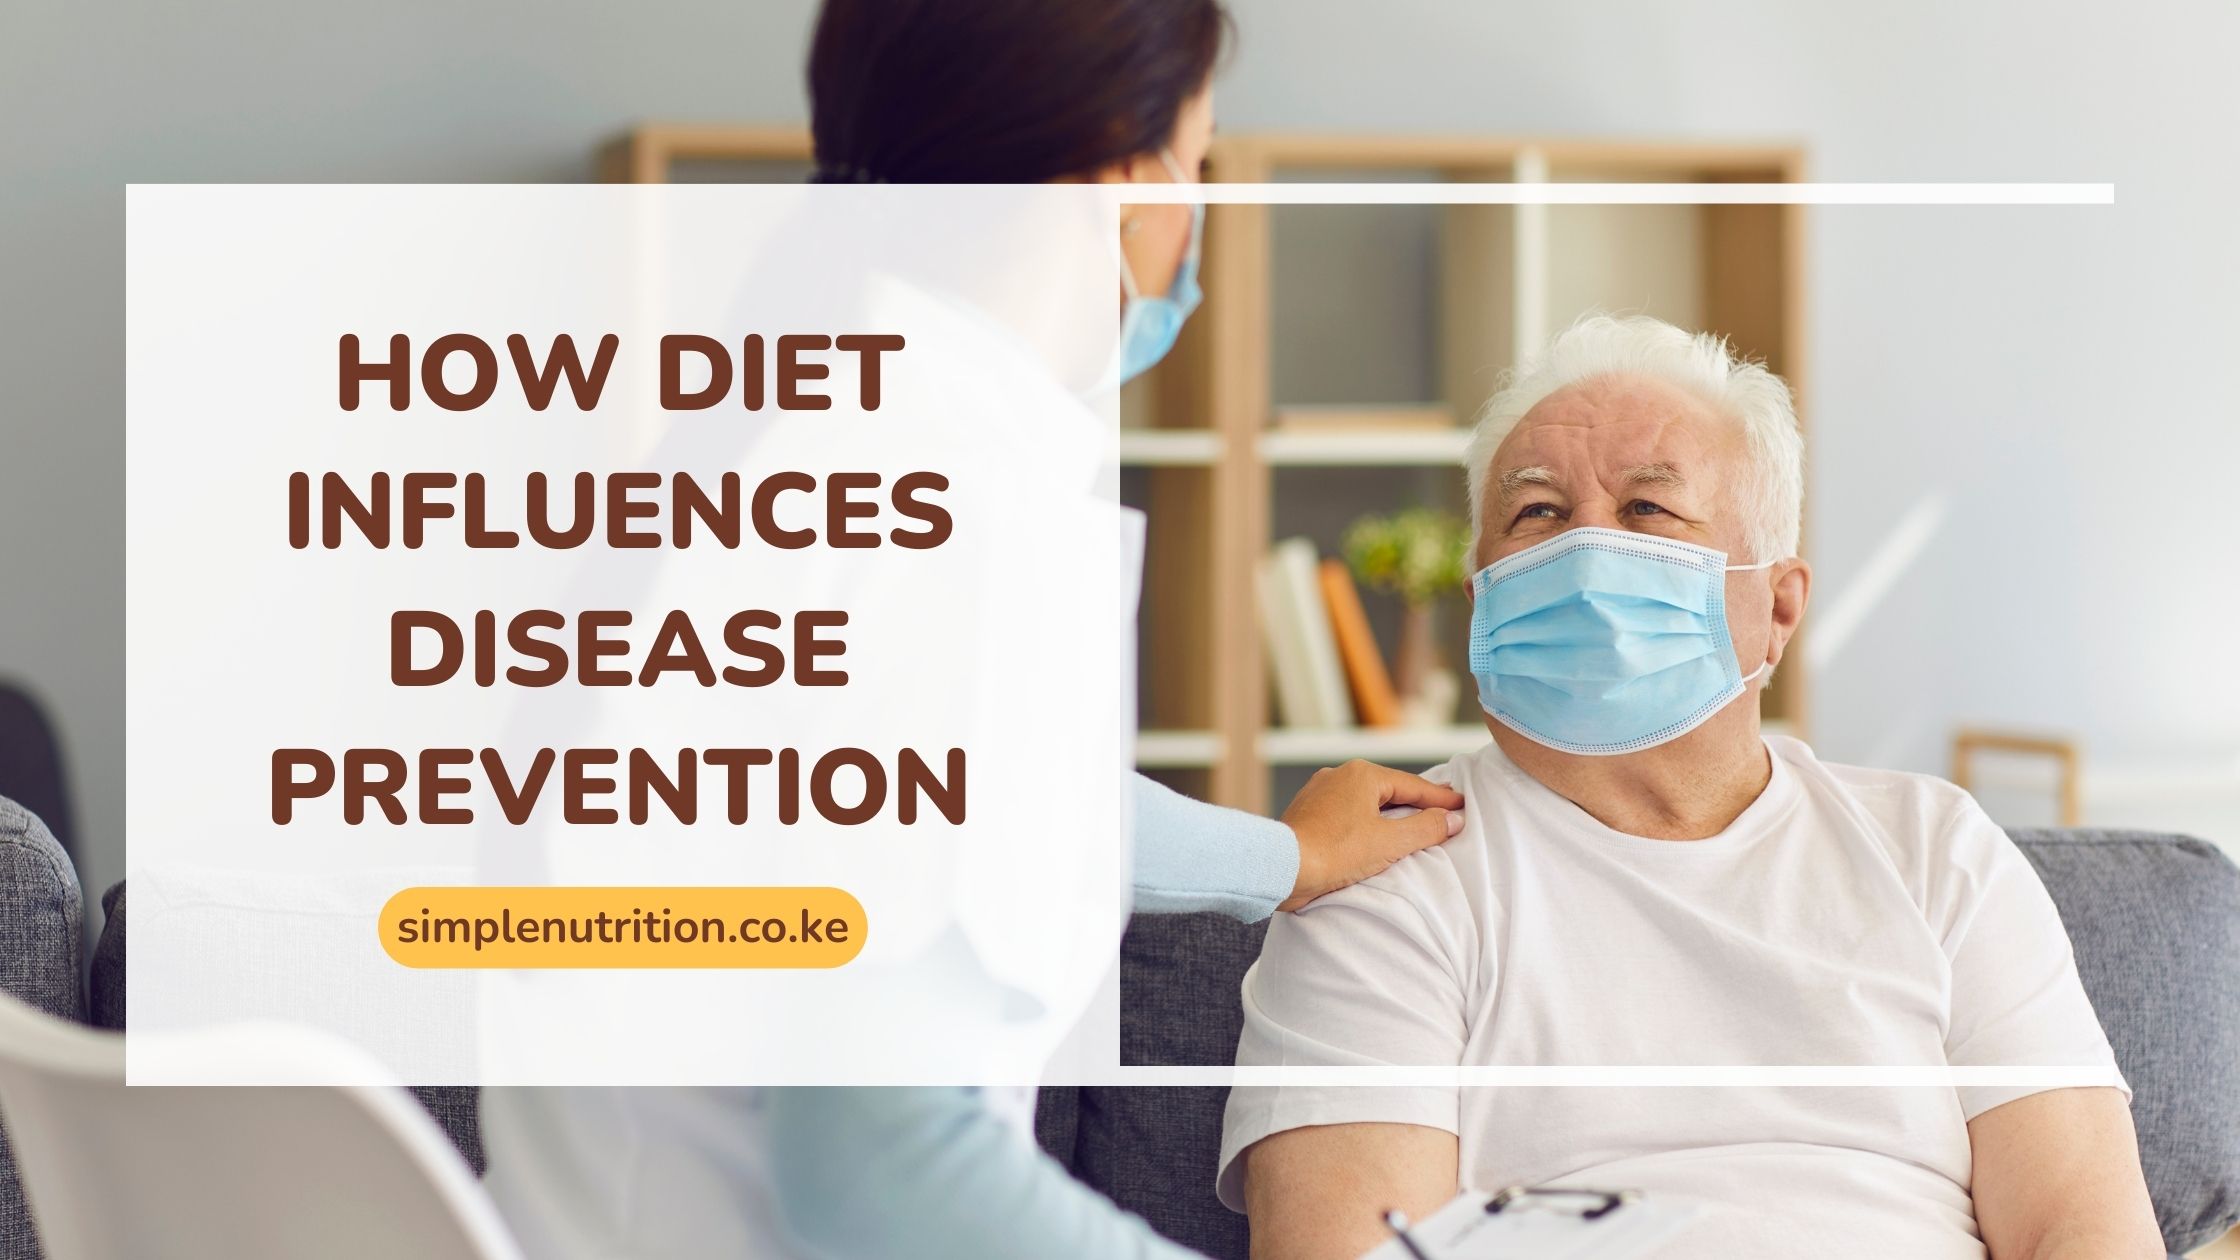 How Diet Influences Disease Development and Prevention